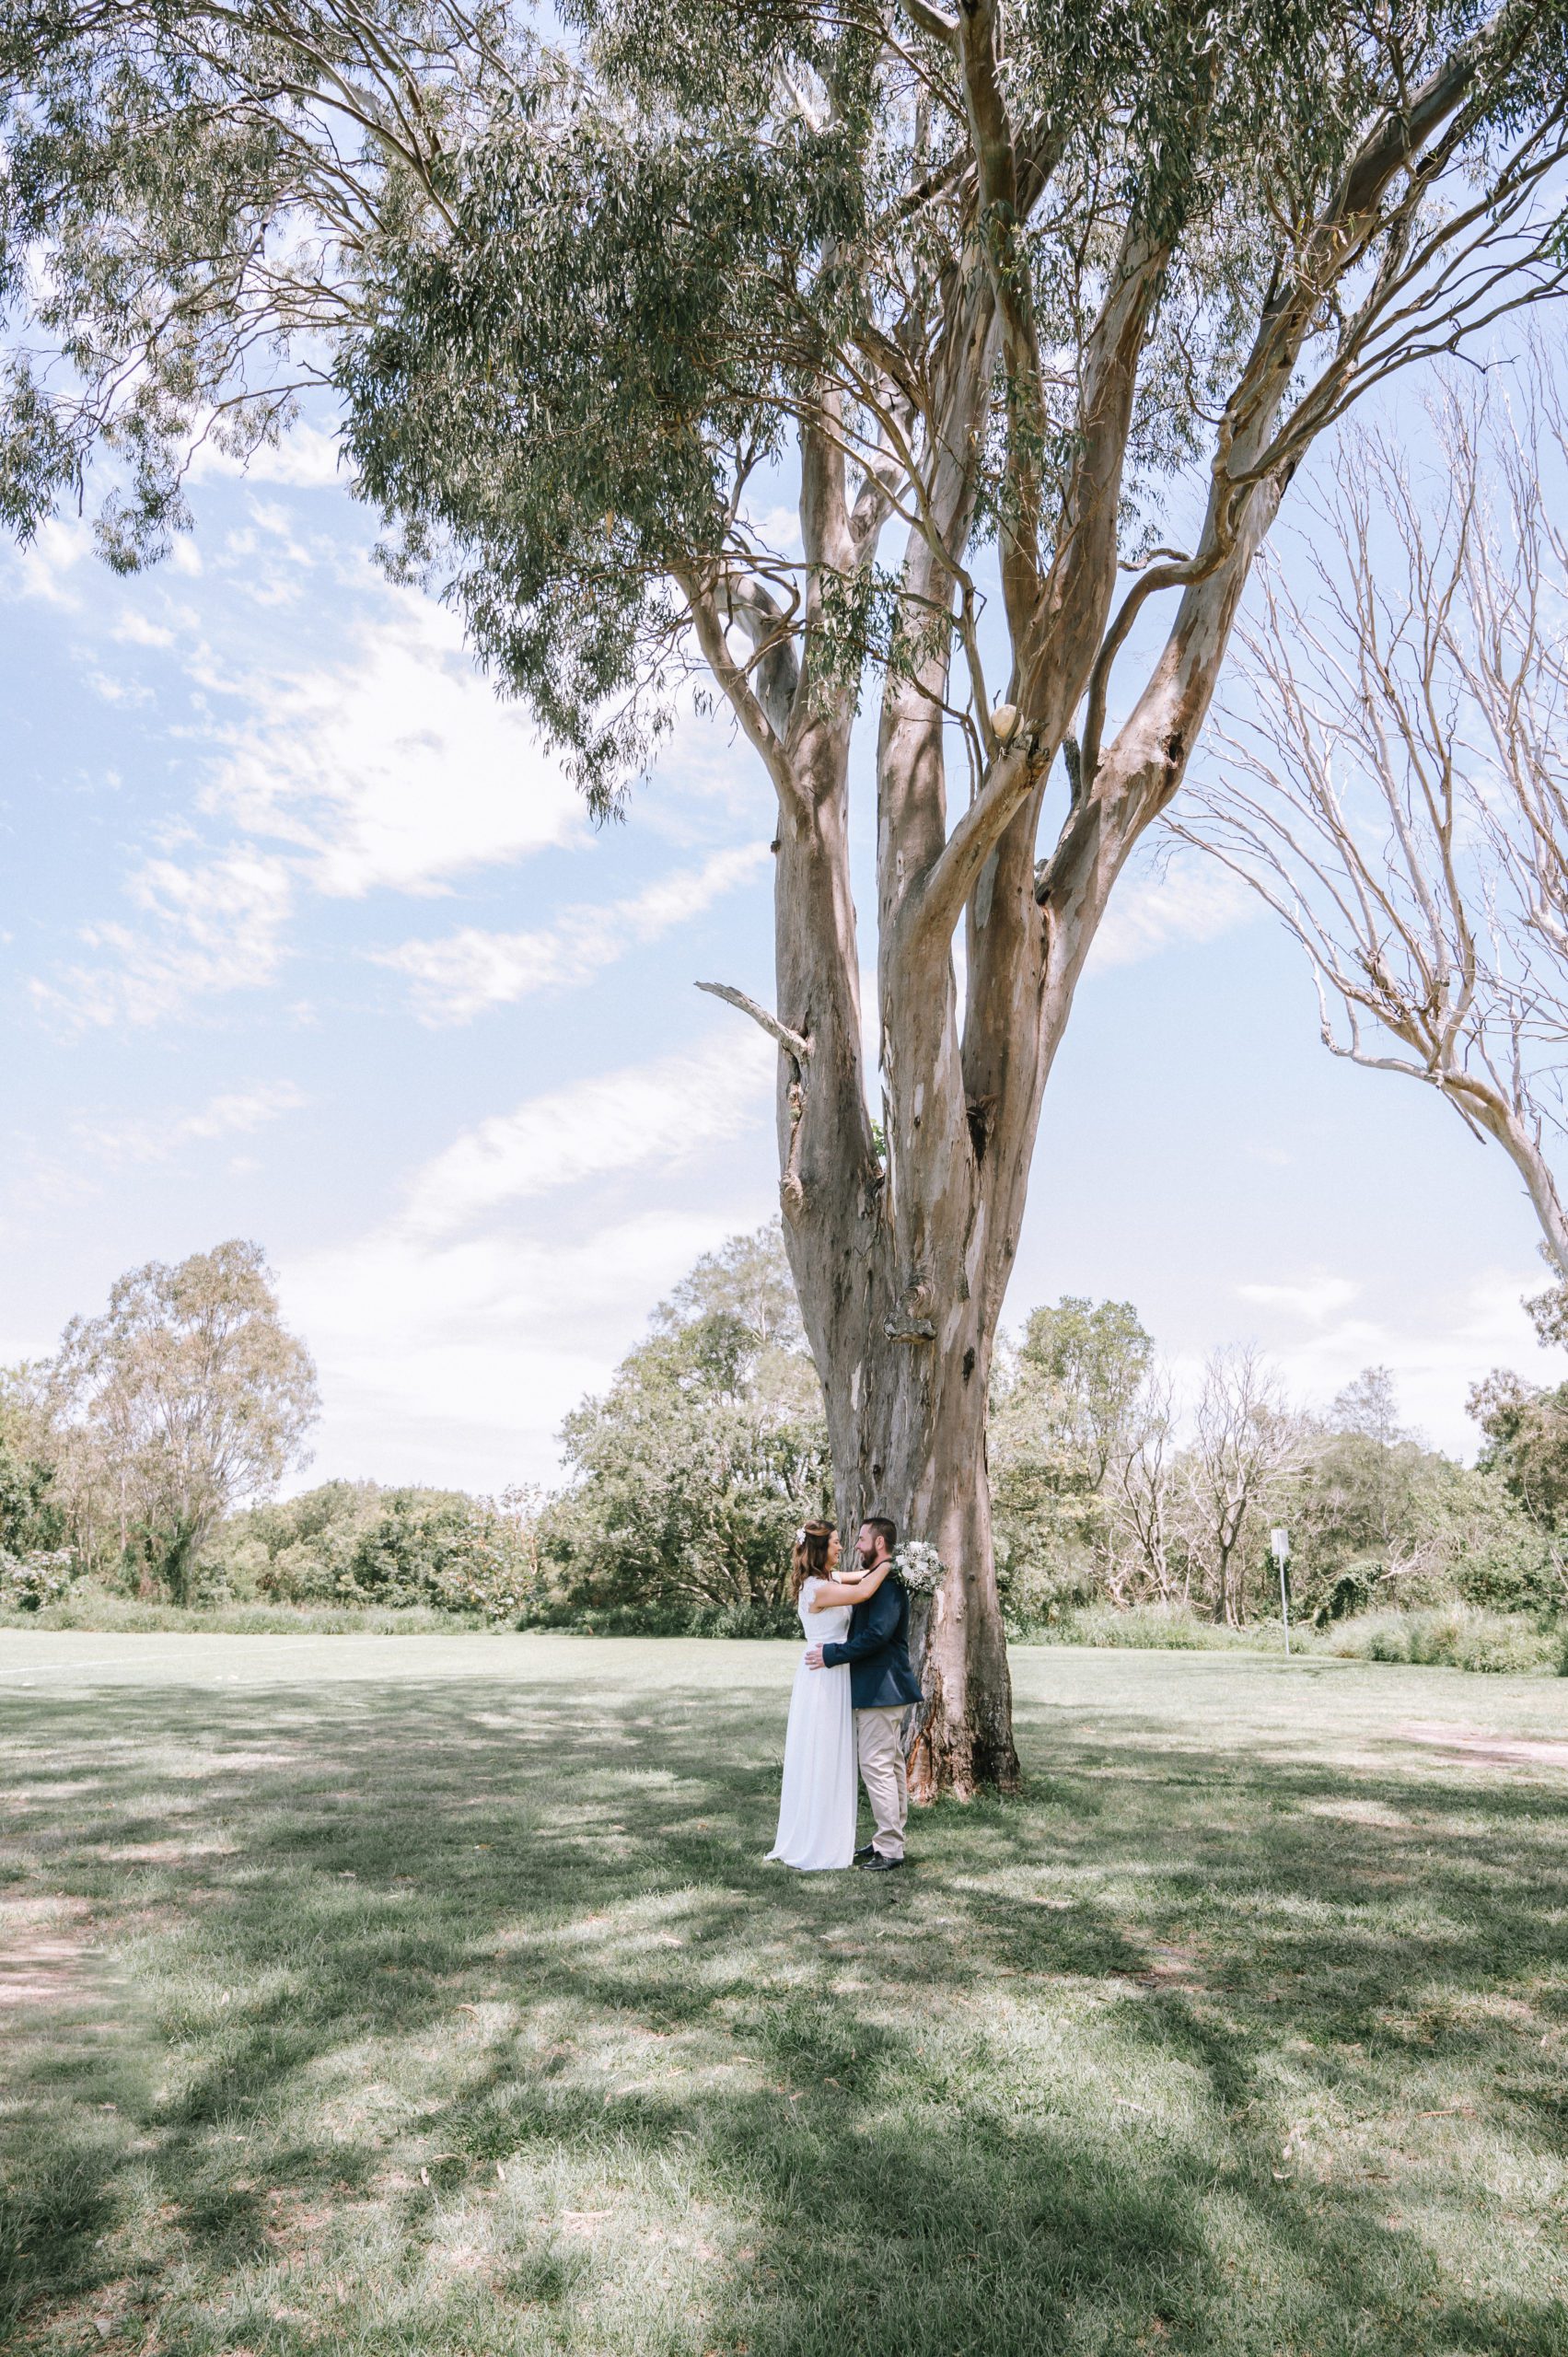 Gayle & Craig standing in front of a tree with their arms around each other after just getting married